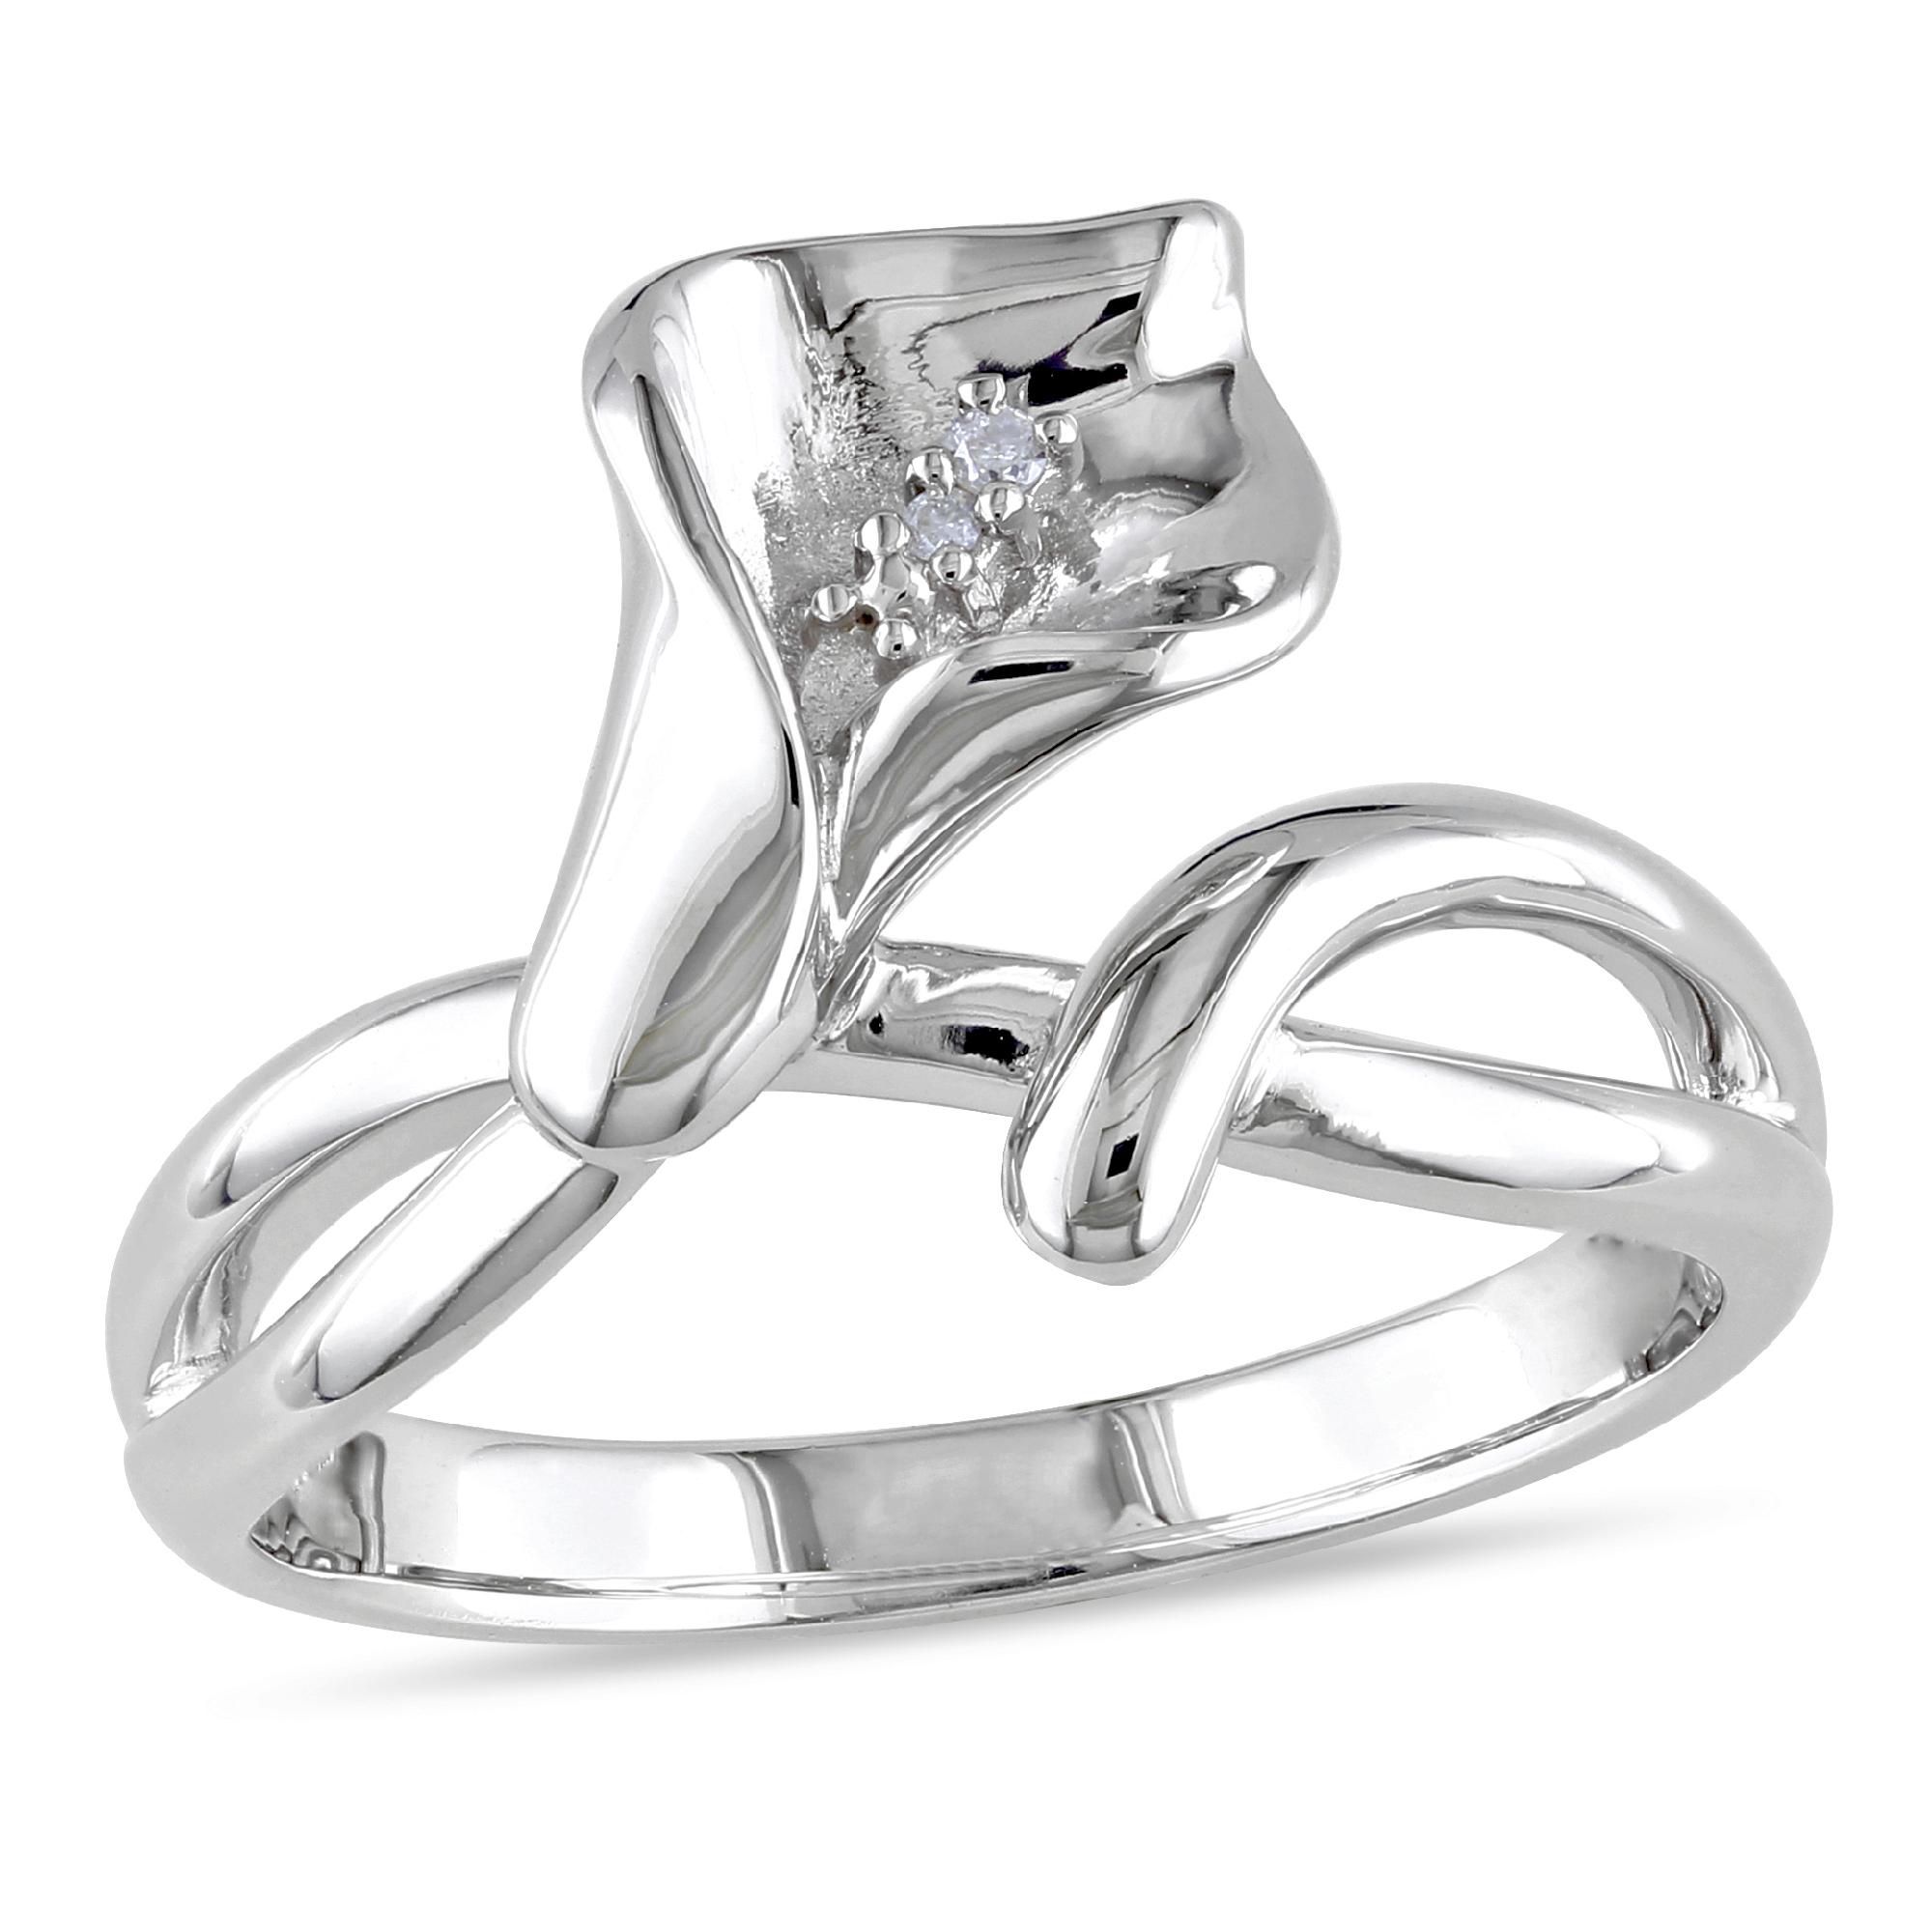 Amour Sterling Silver 0.011 CT Diamond Flower Ring (GH I1;I2)